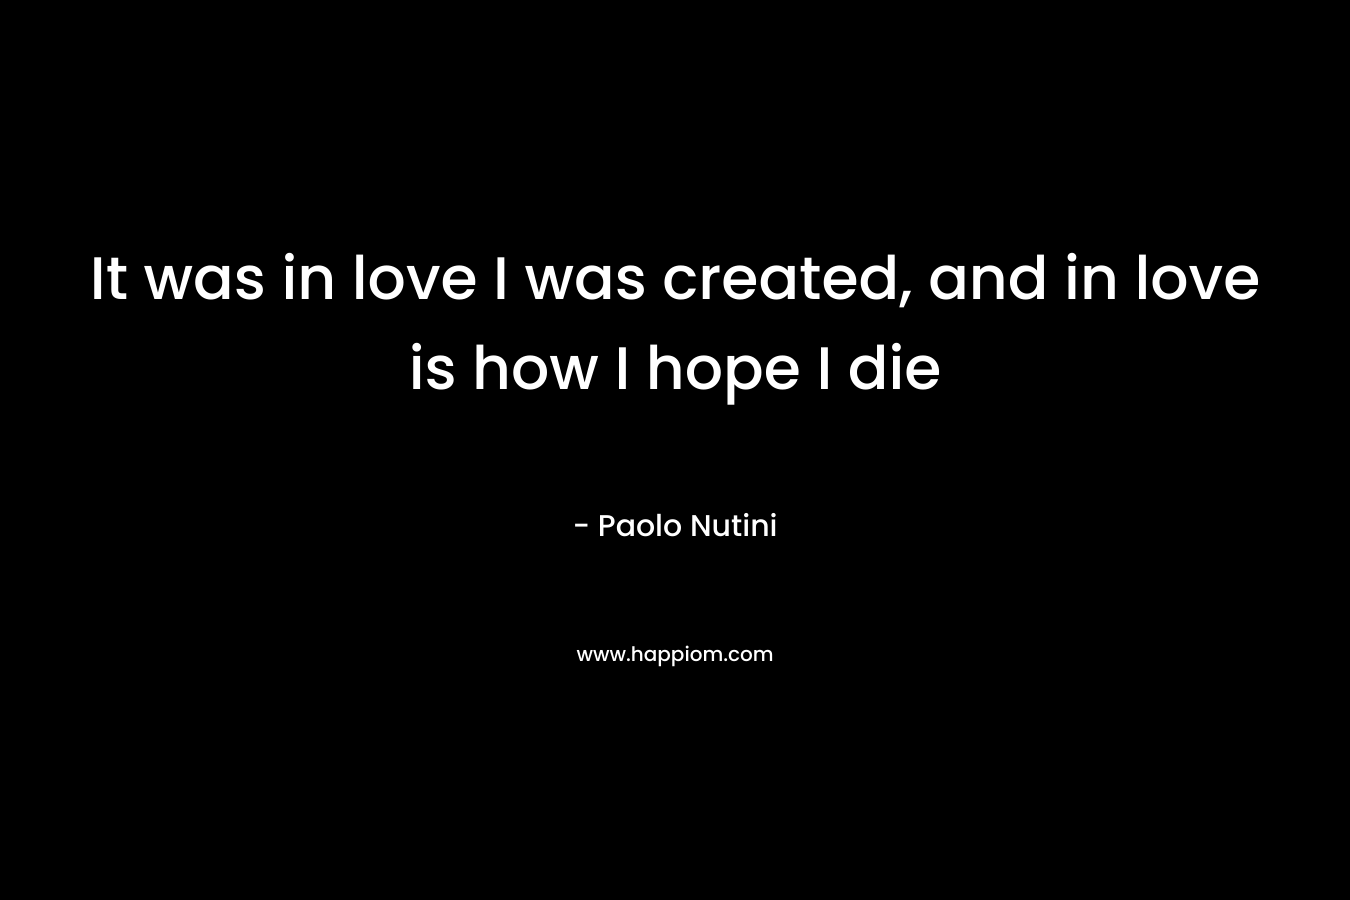 It was in love I was created, and in love is how I hope I die